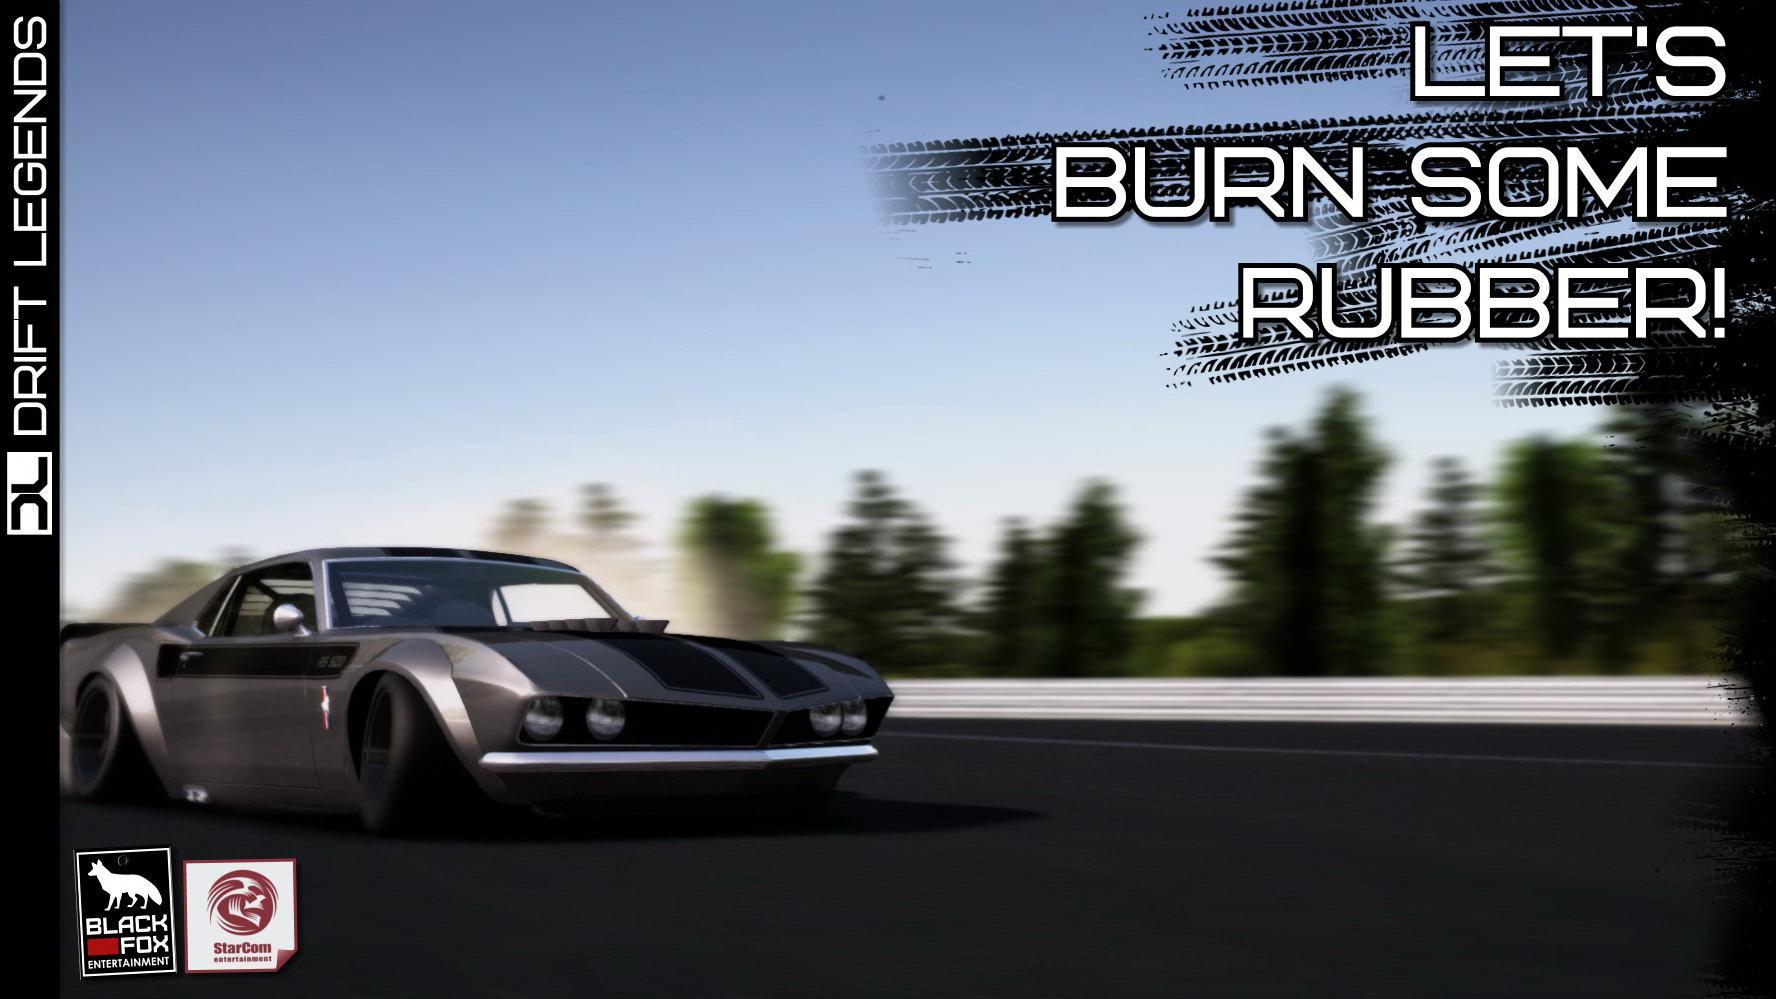 Real Drift Car Racing Lite - Apps on Google Play